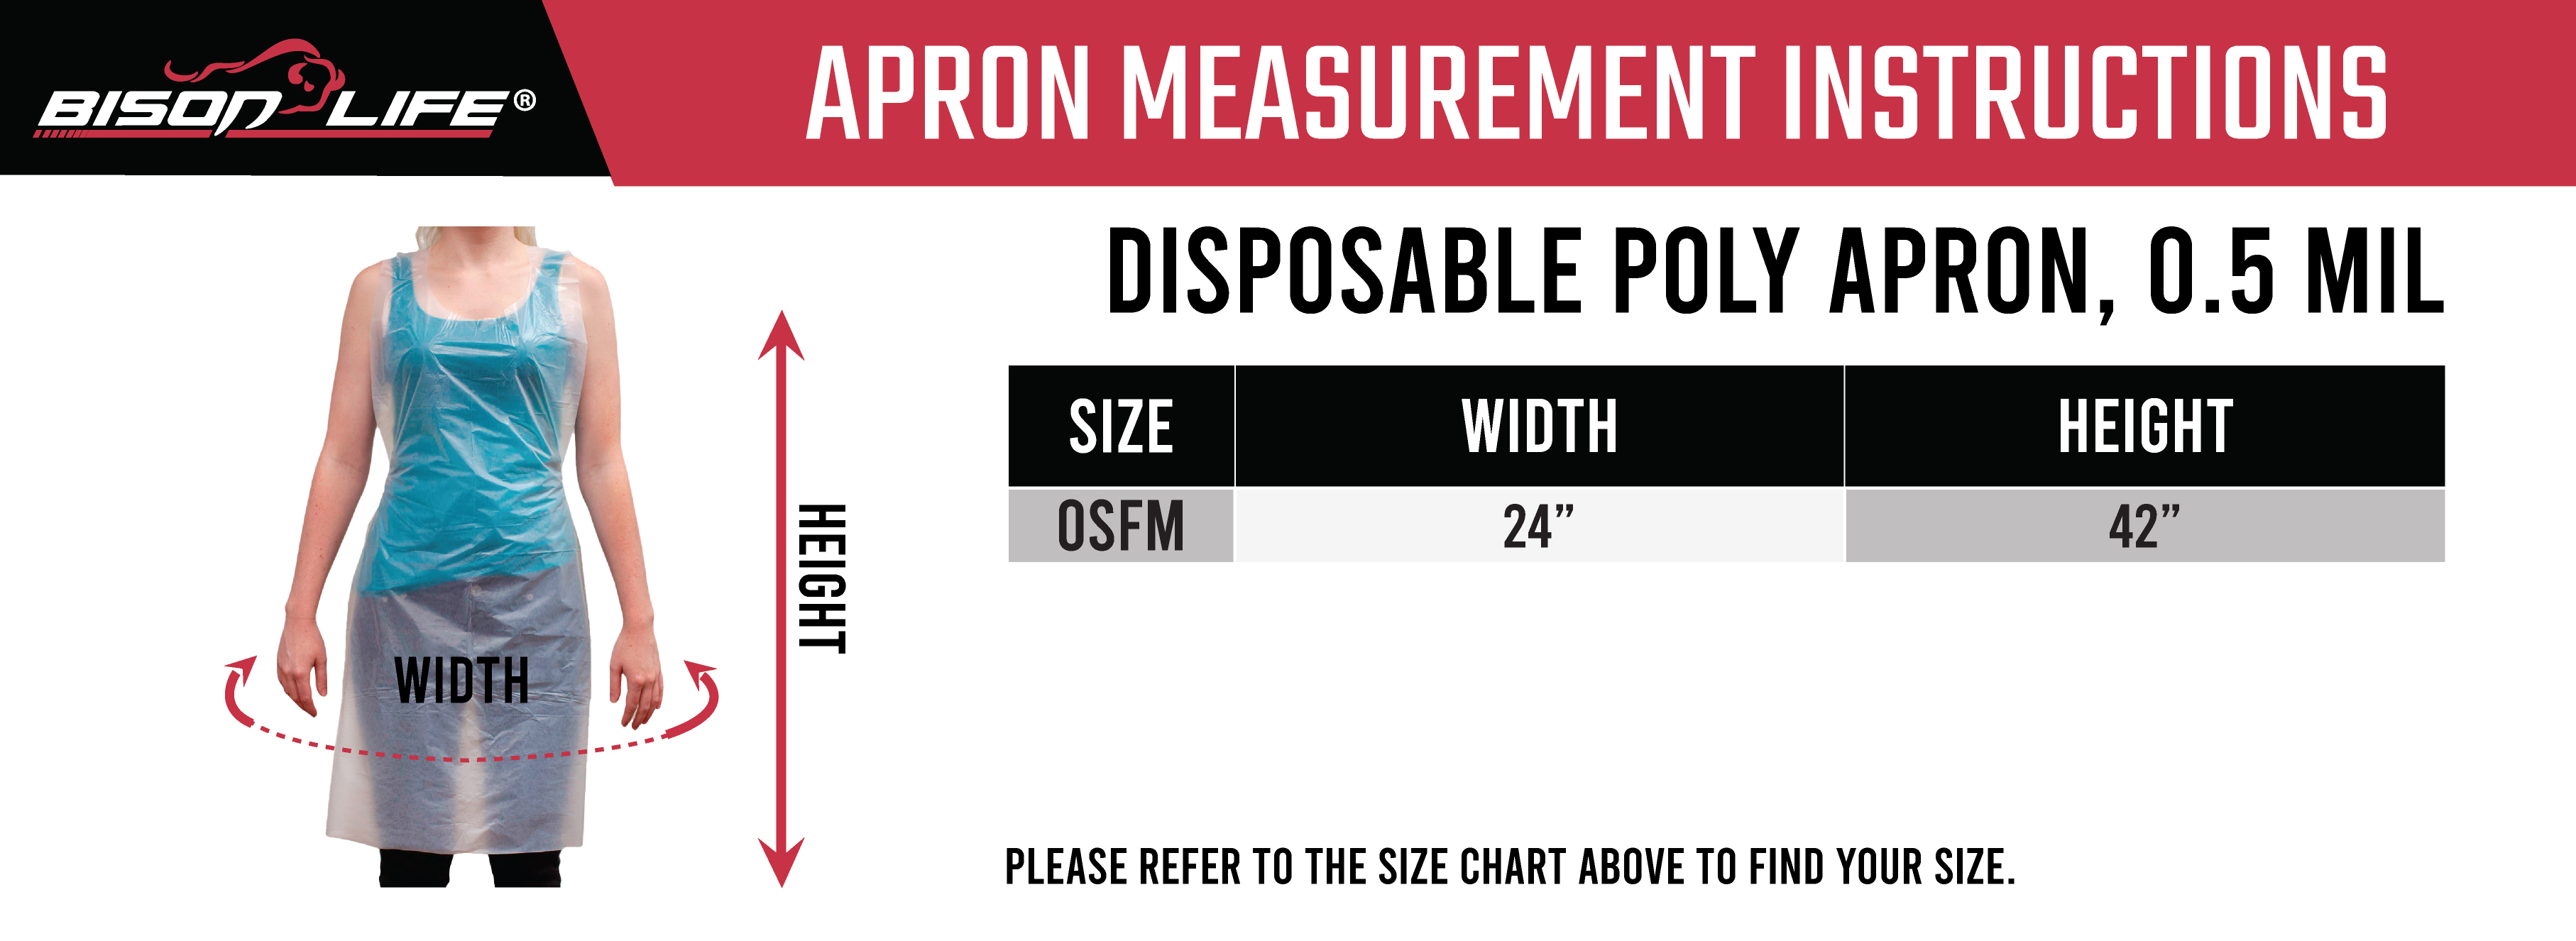 Disposable Poly Apron Size Chart